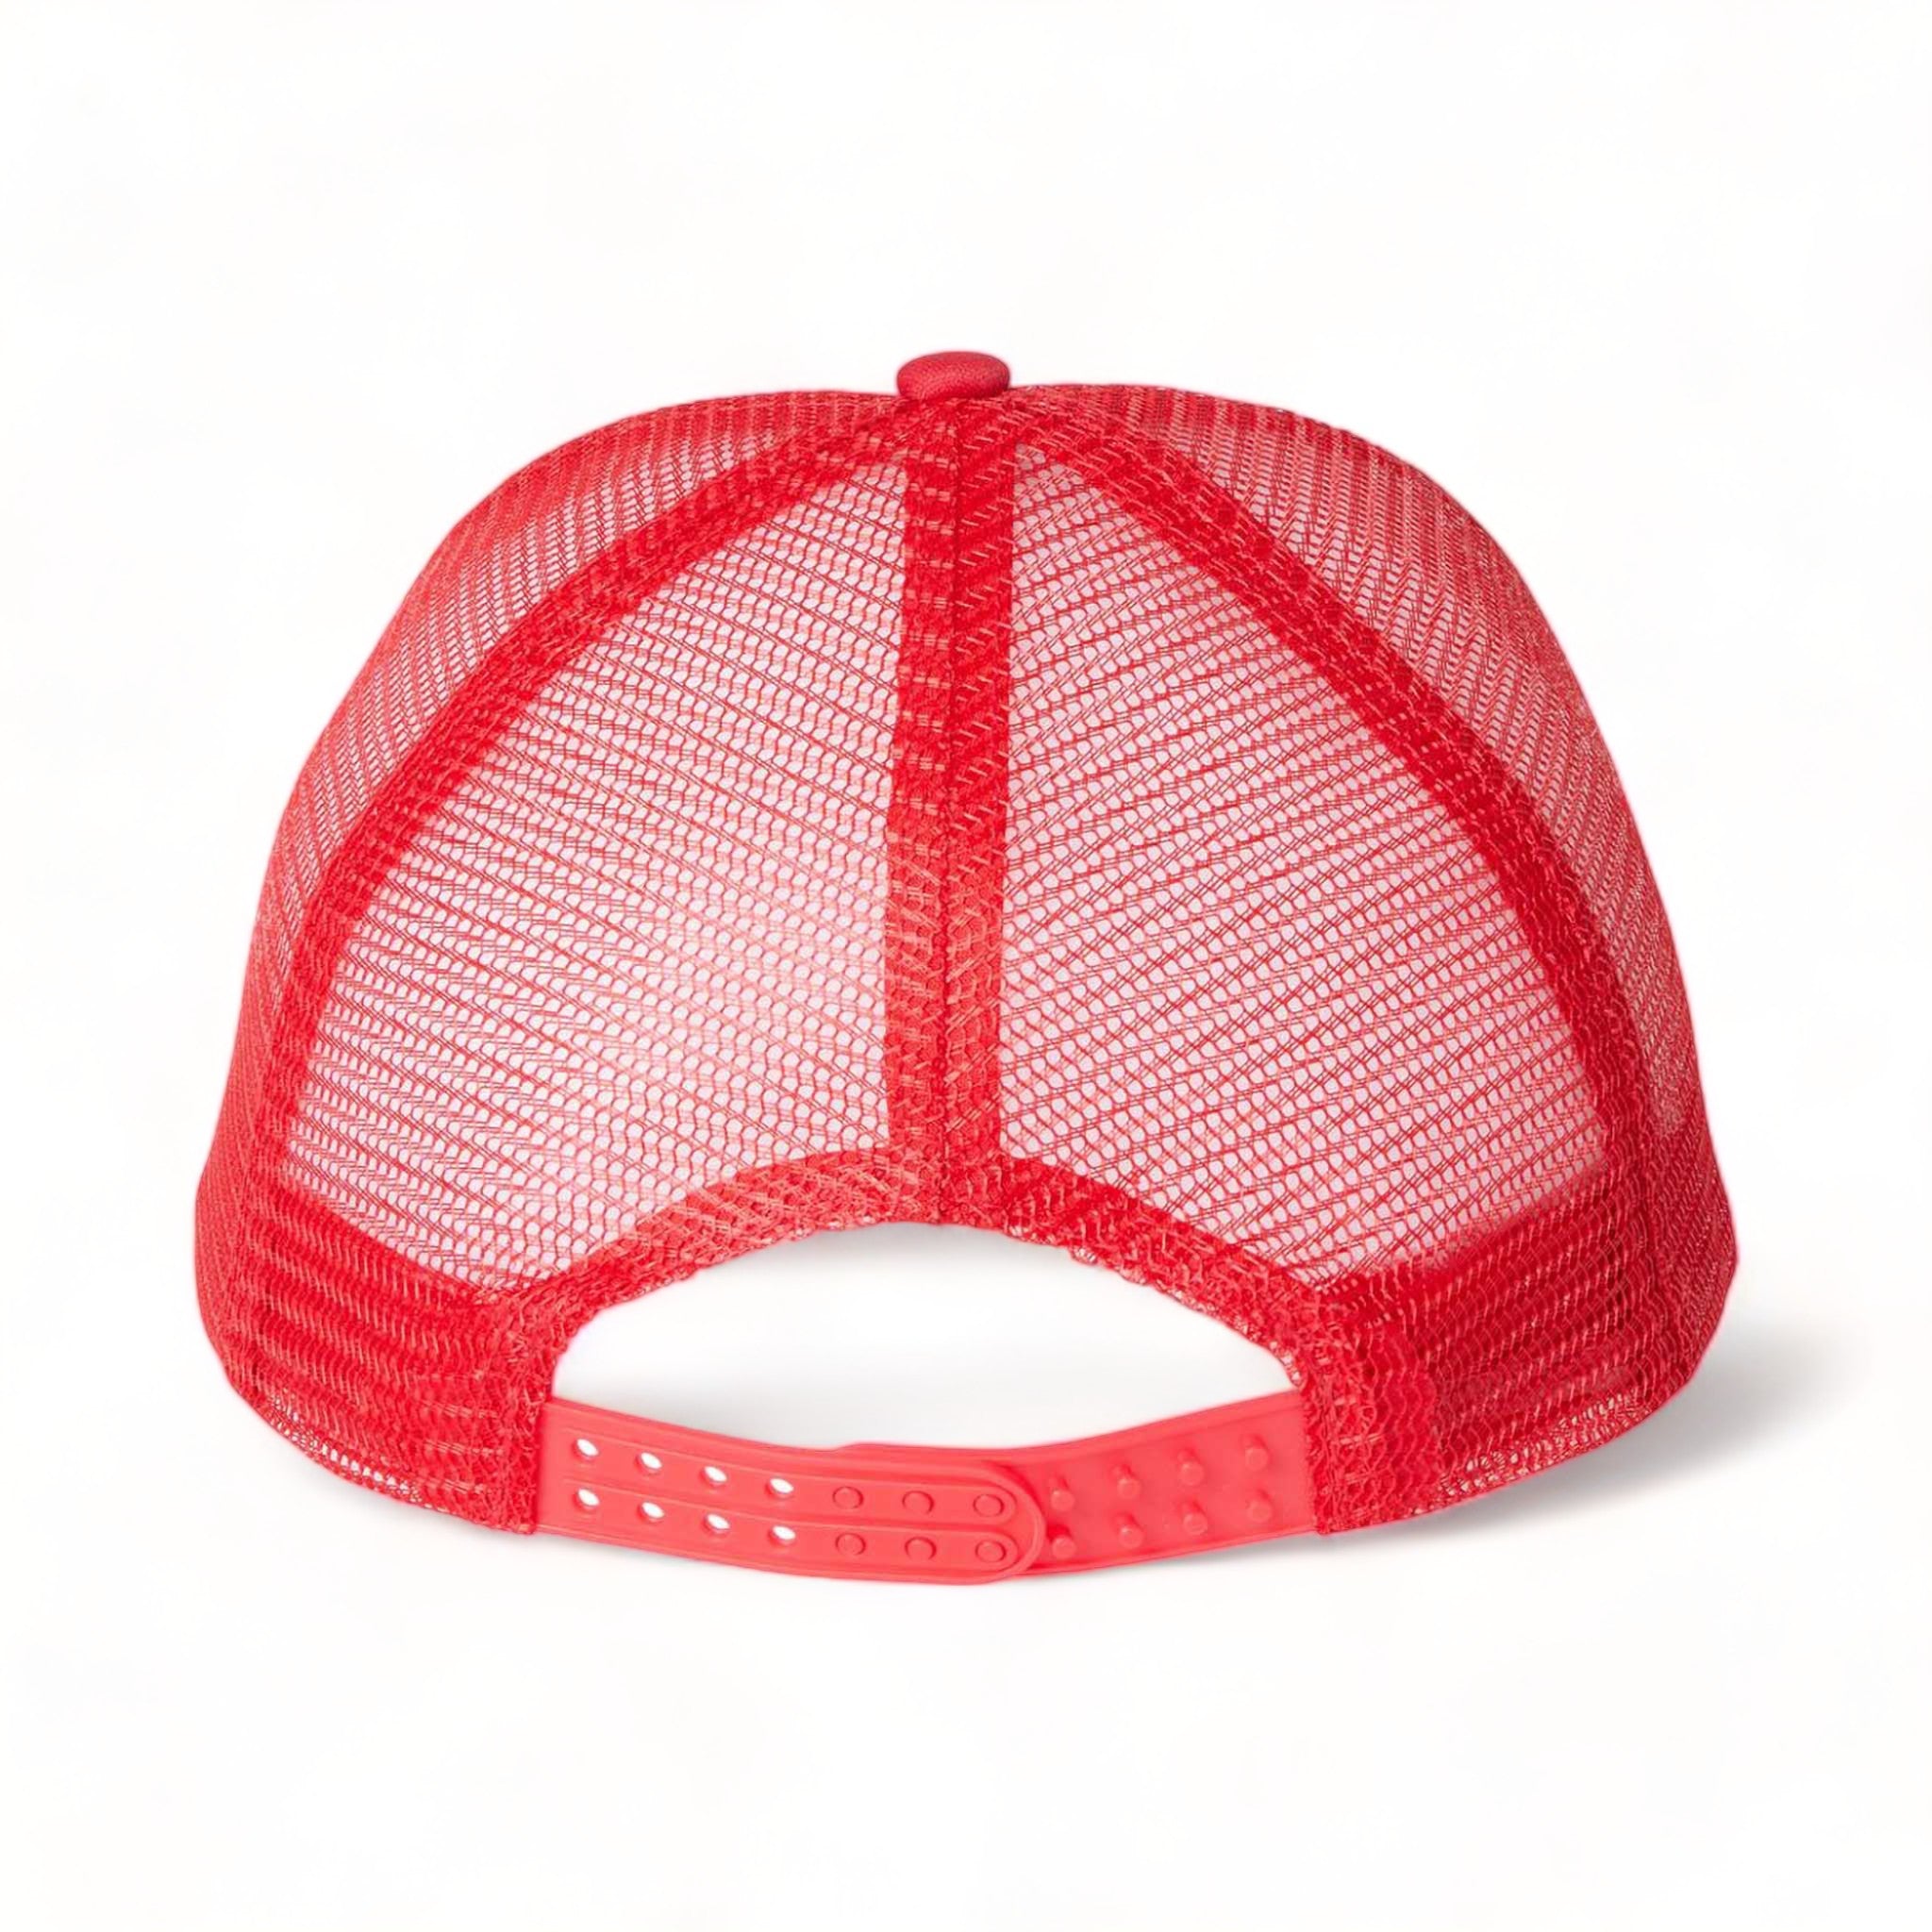 Back view of Valucap VC700 custom hat in white and red